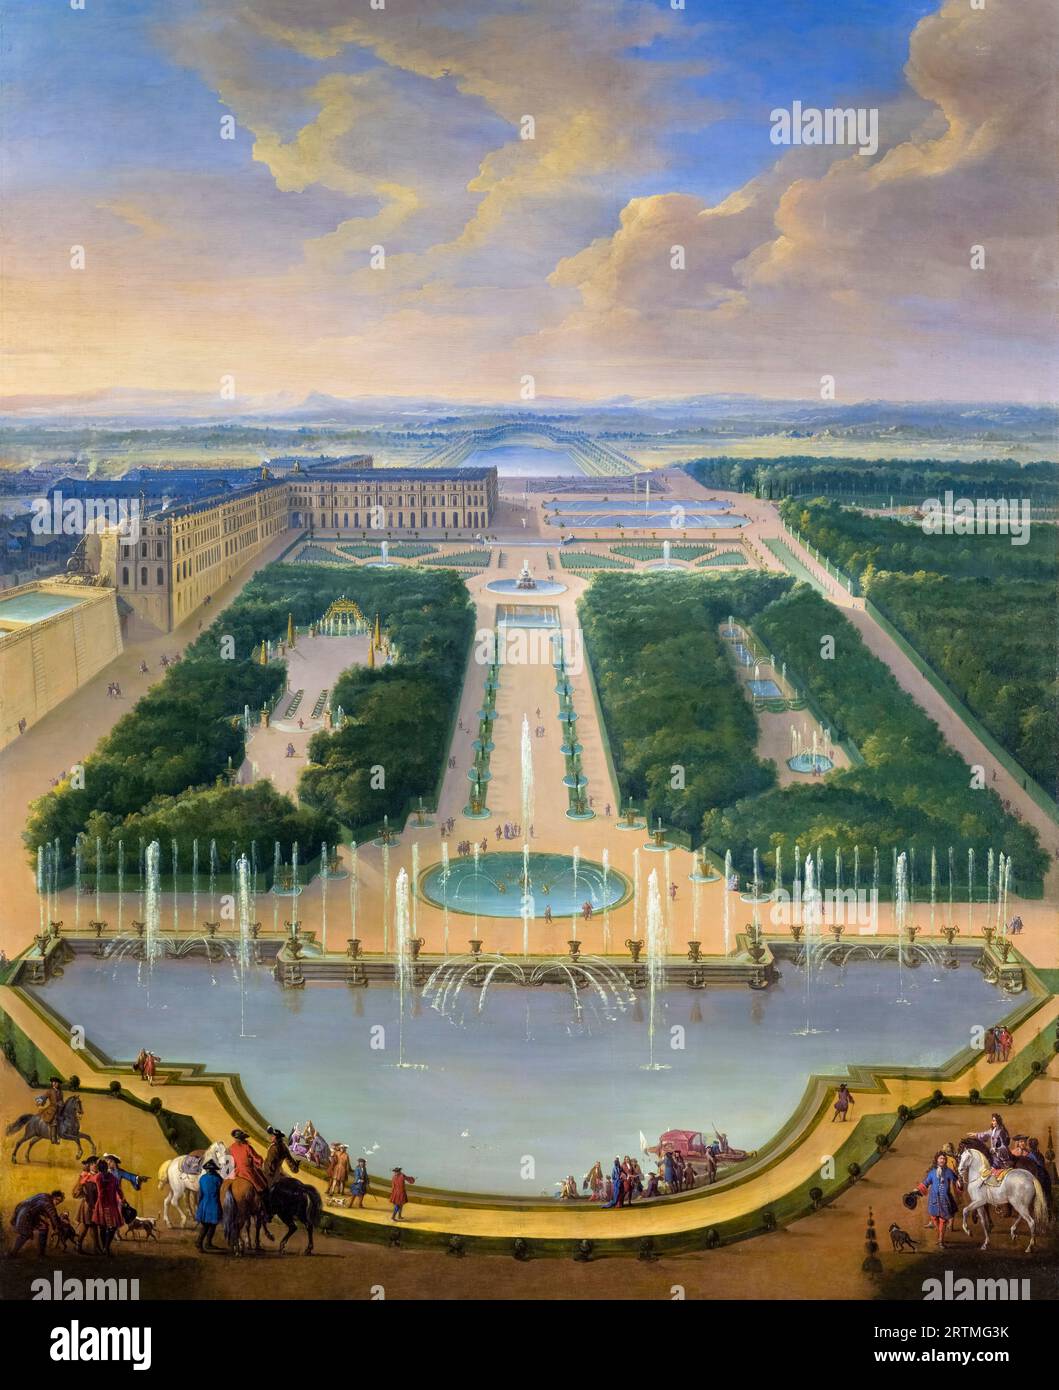 Aerial View of the Palace of Versailles from the Dragon Fountain and Neptune Fountain, landscape painting in oil by Jean-Baptiste Martin the Elder, circa 1700 Stock Photo